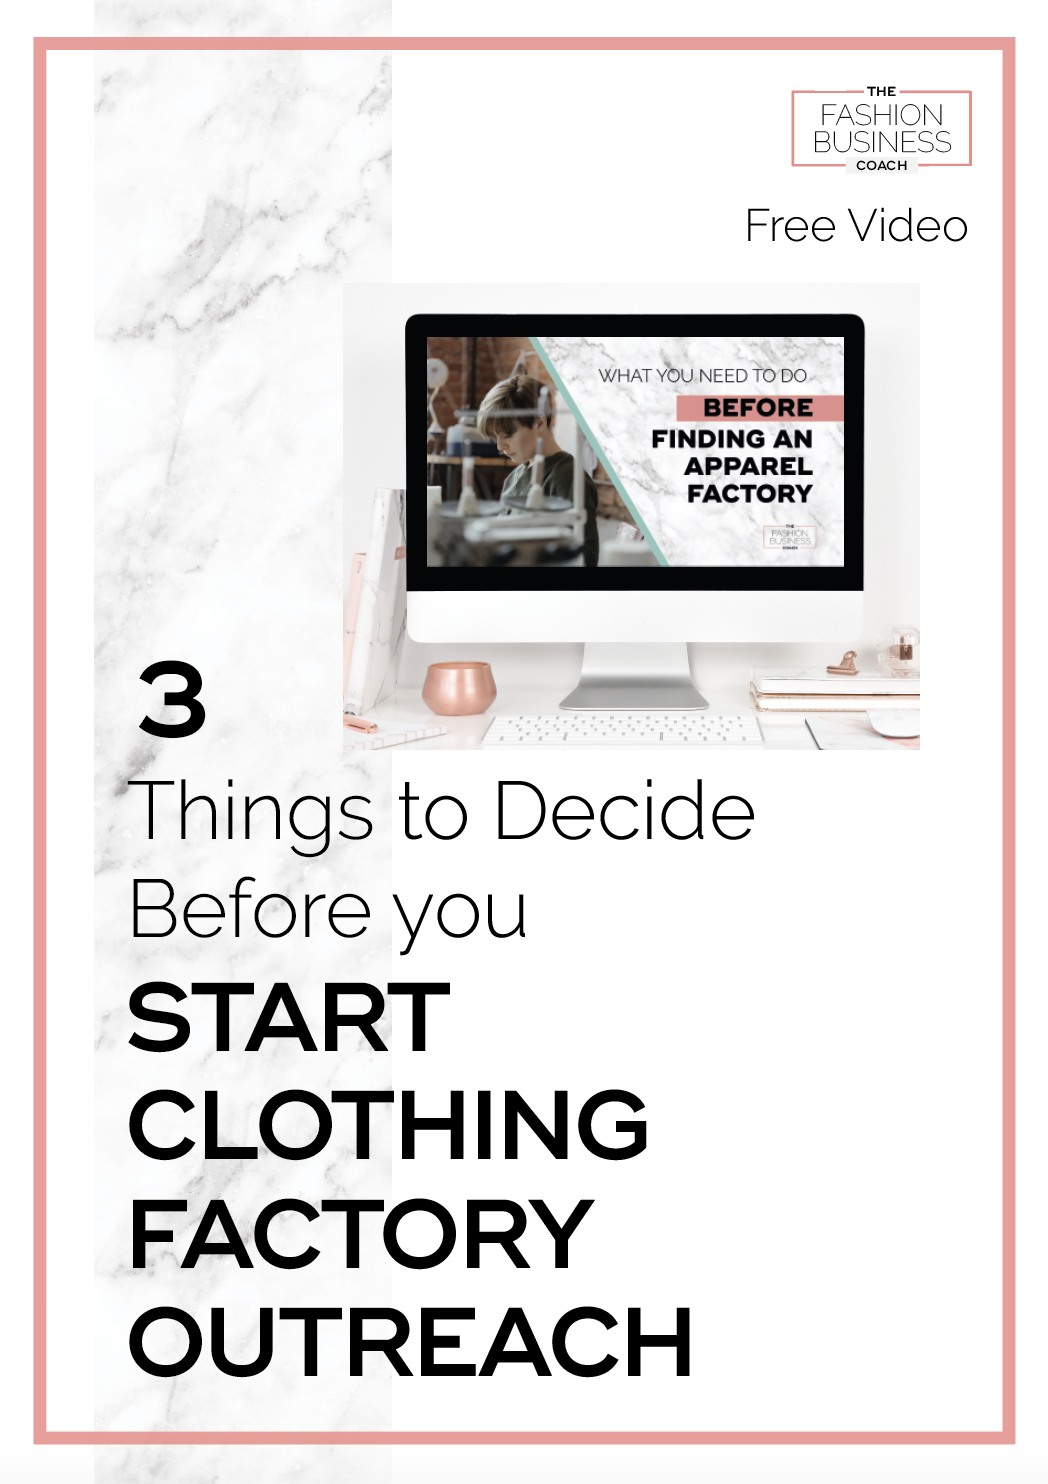 Things to Decide Before you Start Clothing Factory Outreach 2.png